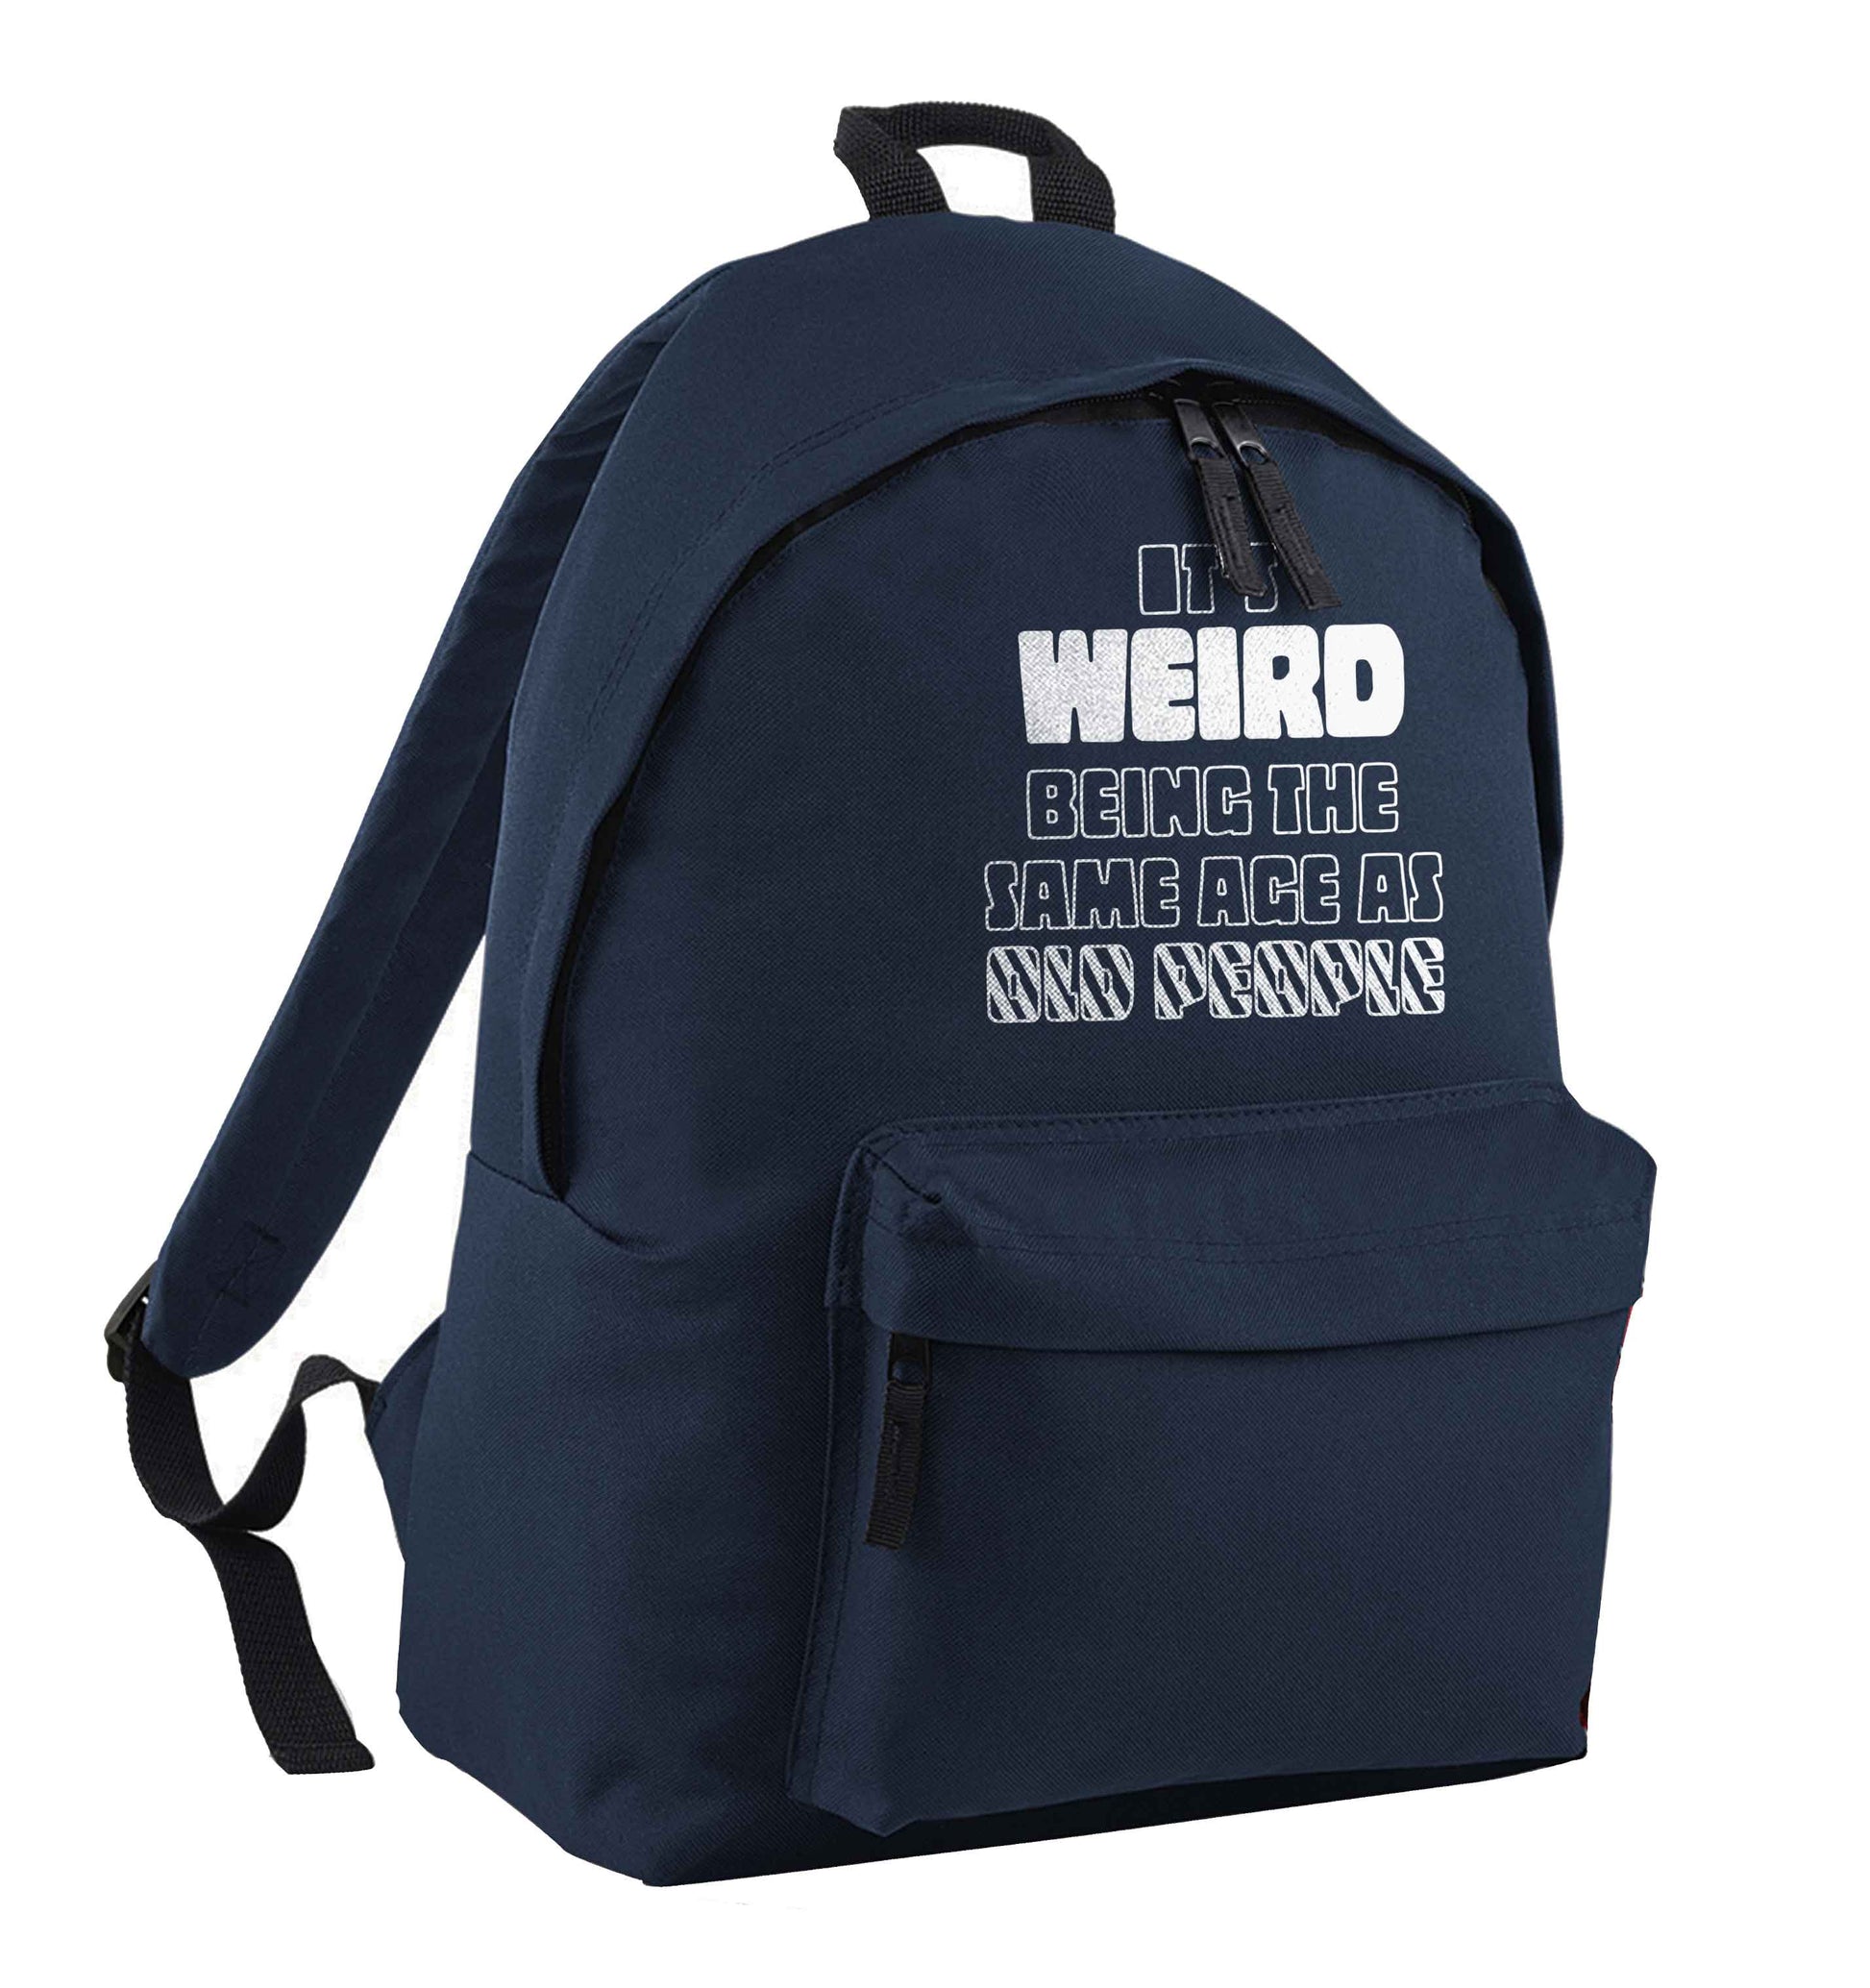 It's weird being the same age as old people navy adults backpack